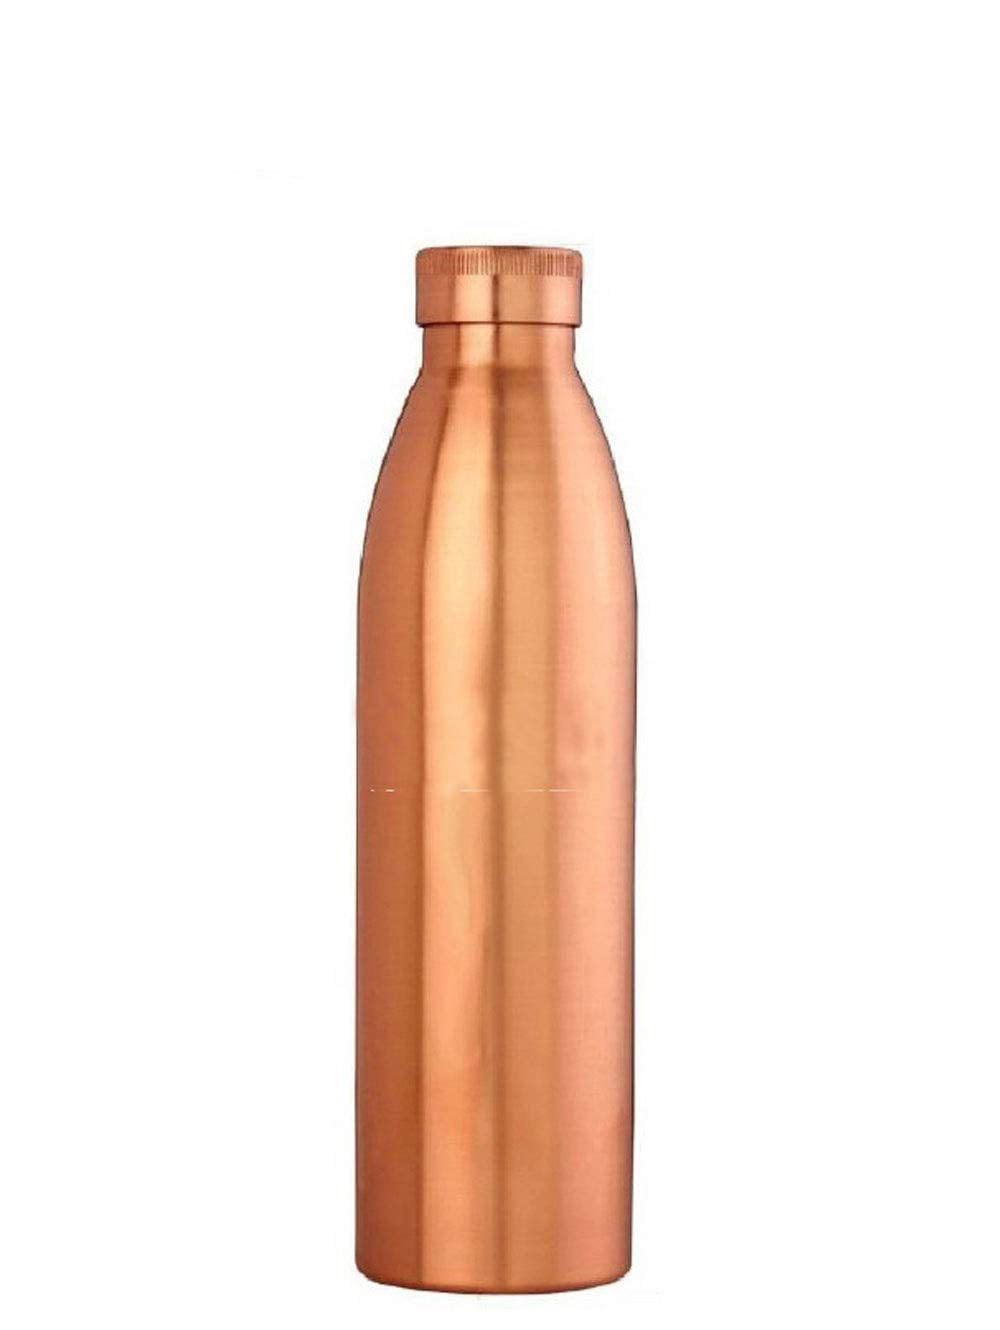 1 Pure Copper Water Bottle For Ayurveda Health Benefits Leak Proof Free USA Ship 